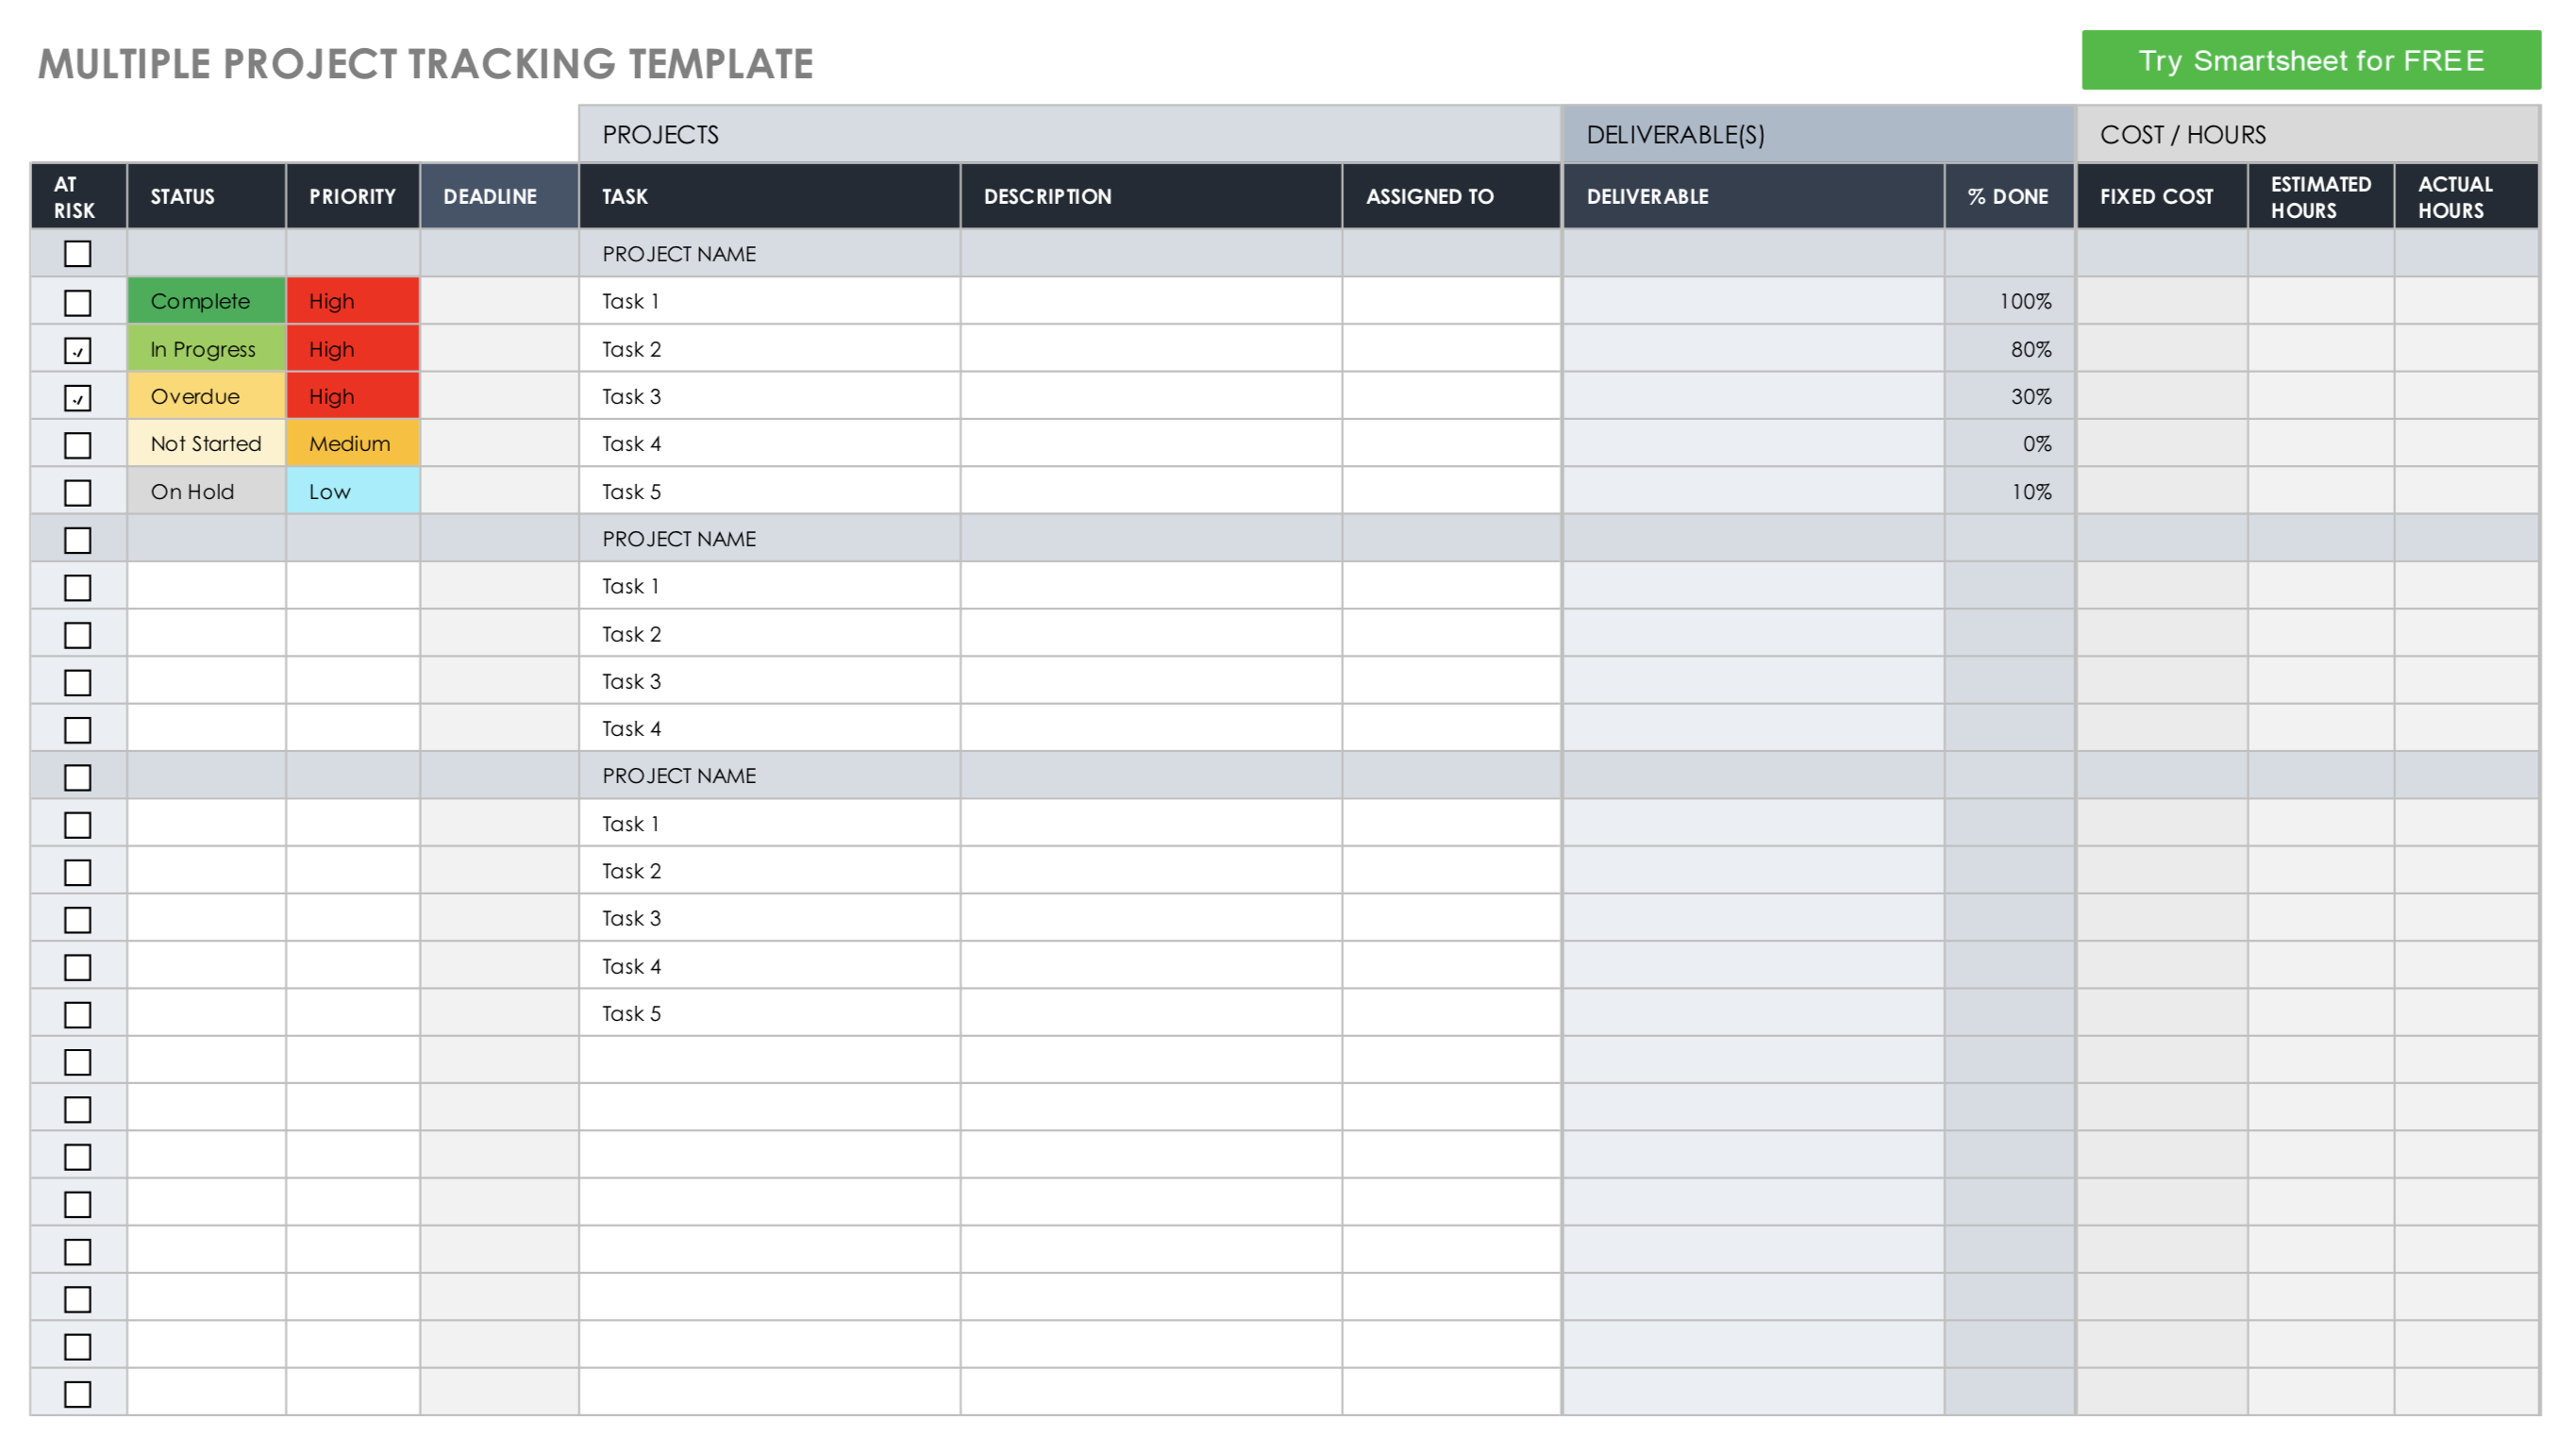 microsoft-excel-tracking-template-image-to-u